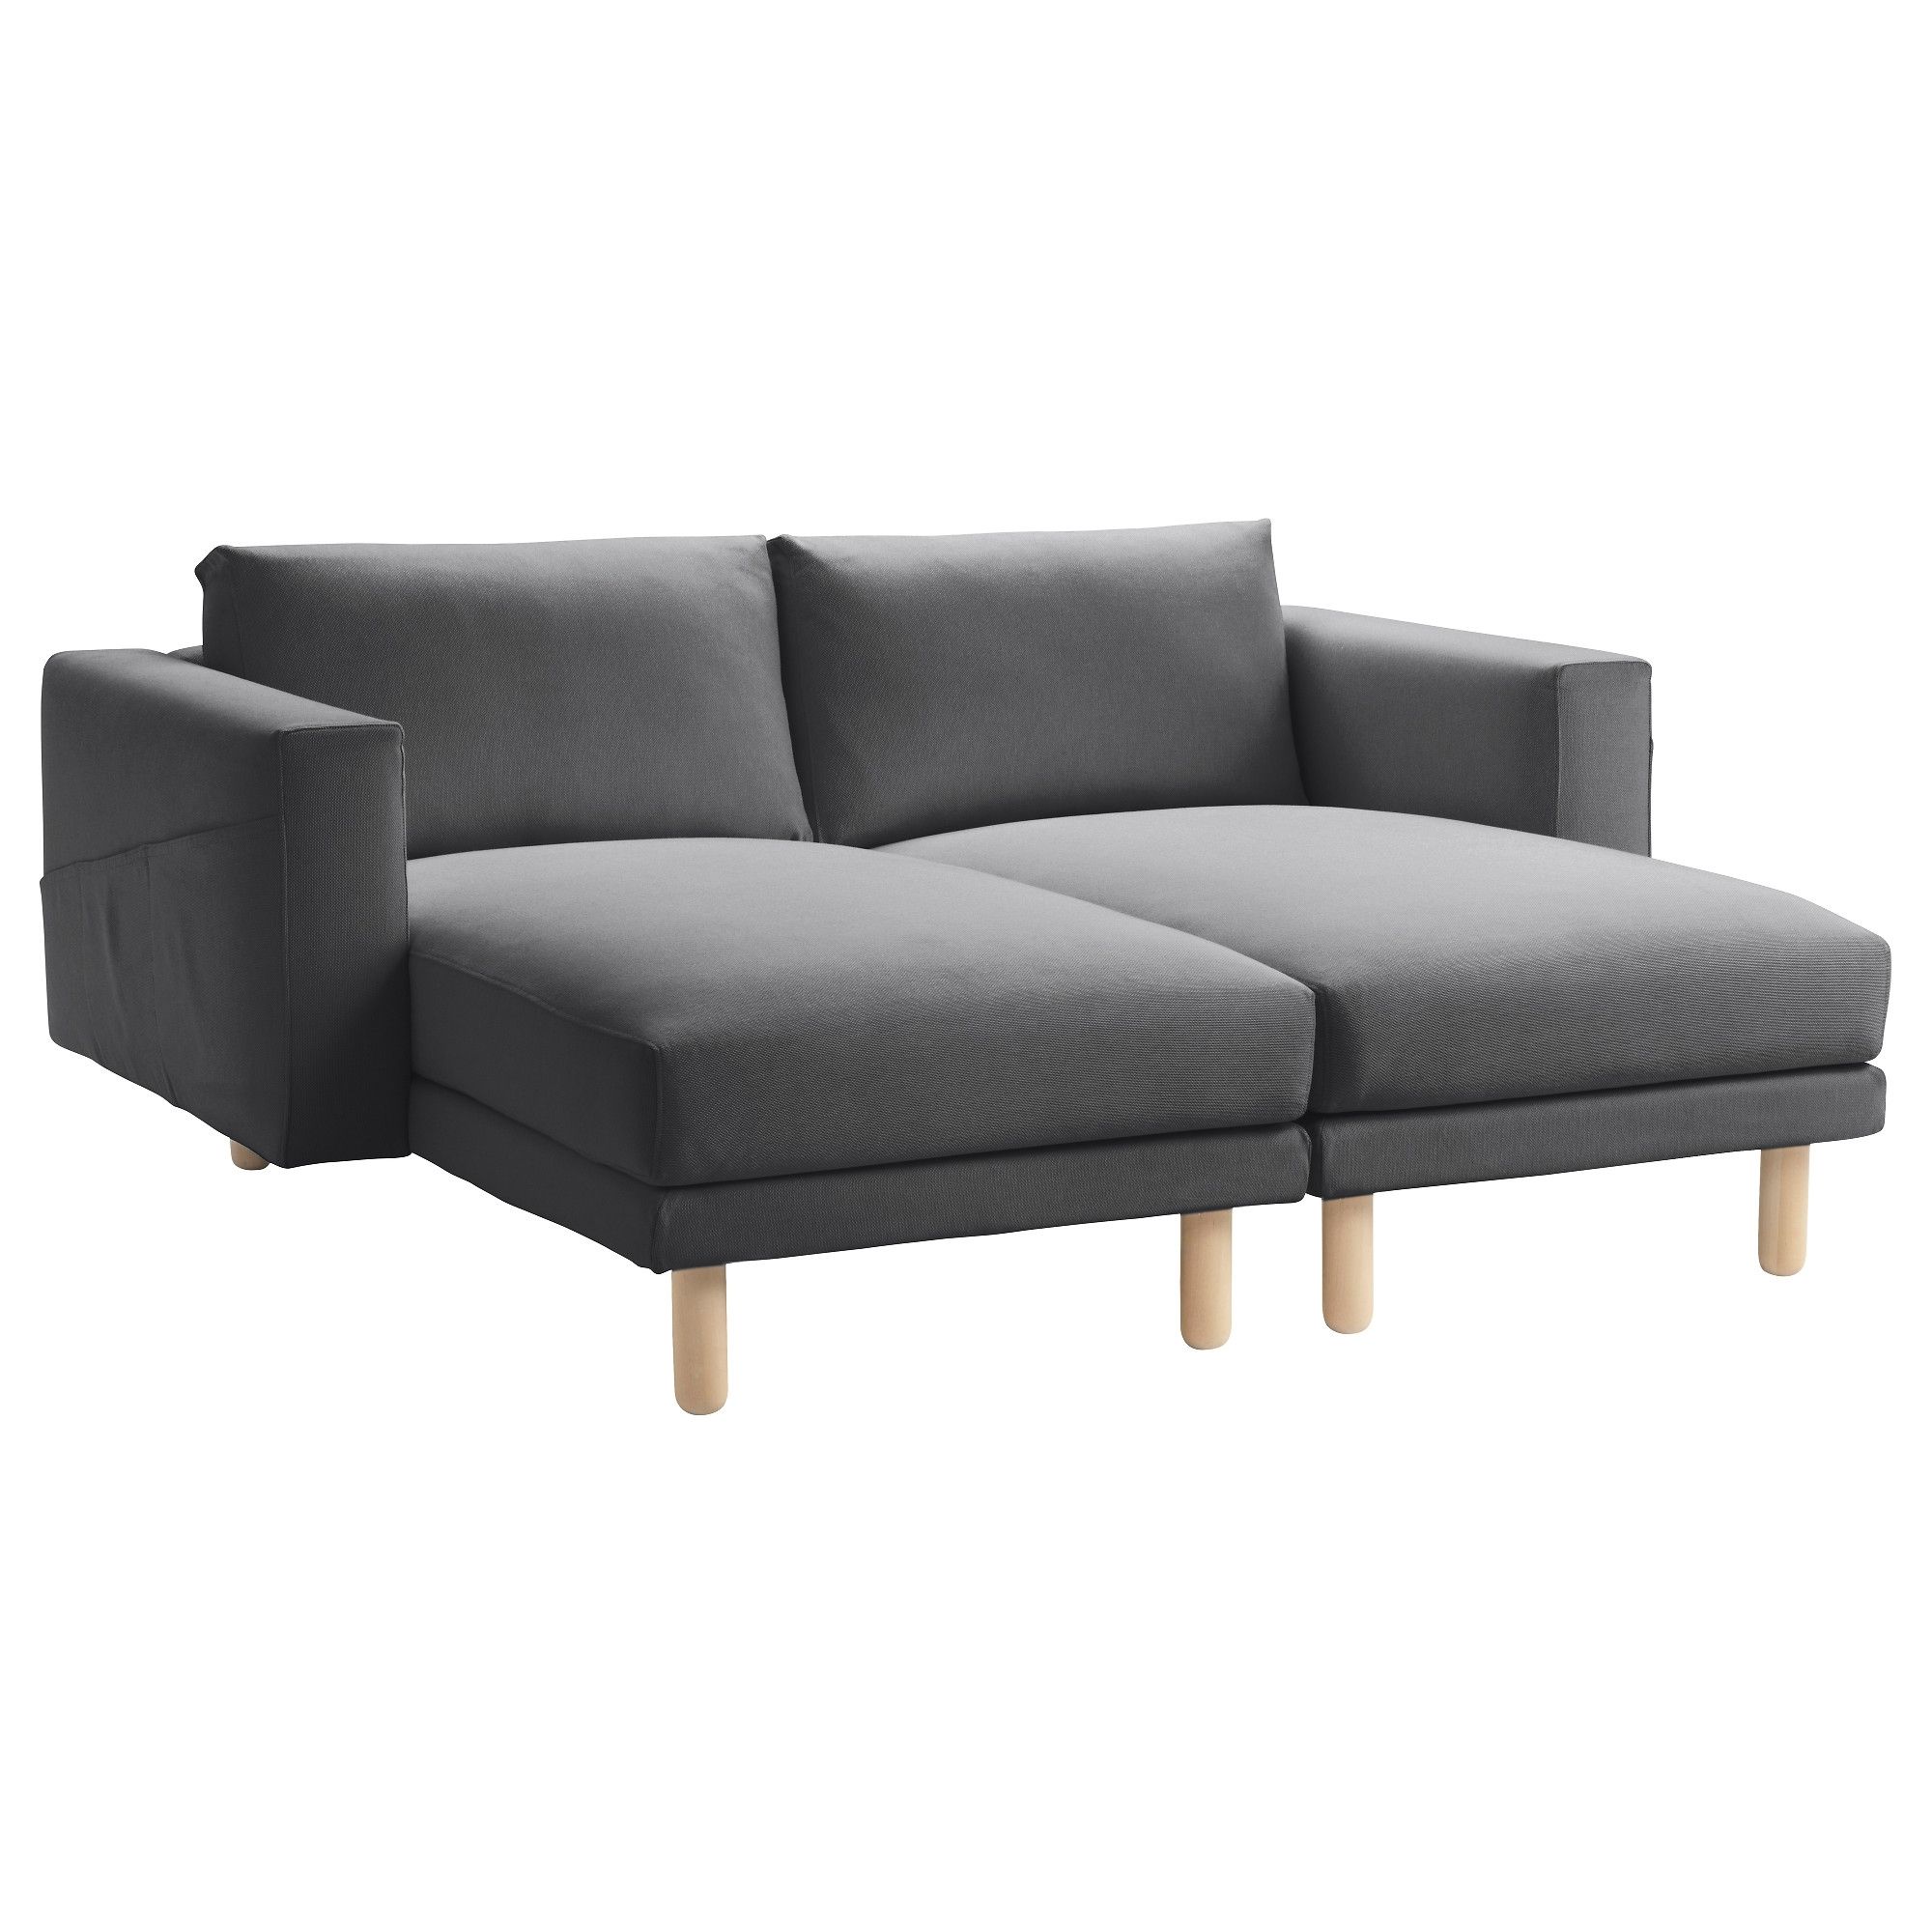 Popular Ikea Chaise Lounges Intended For Norsborg Sectional, 2 Seat – Finnsta Dark Gray – Ikea (View 4 of 15)